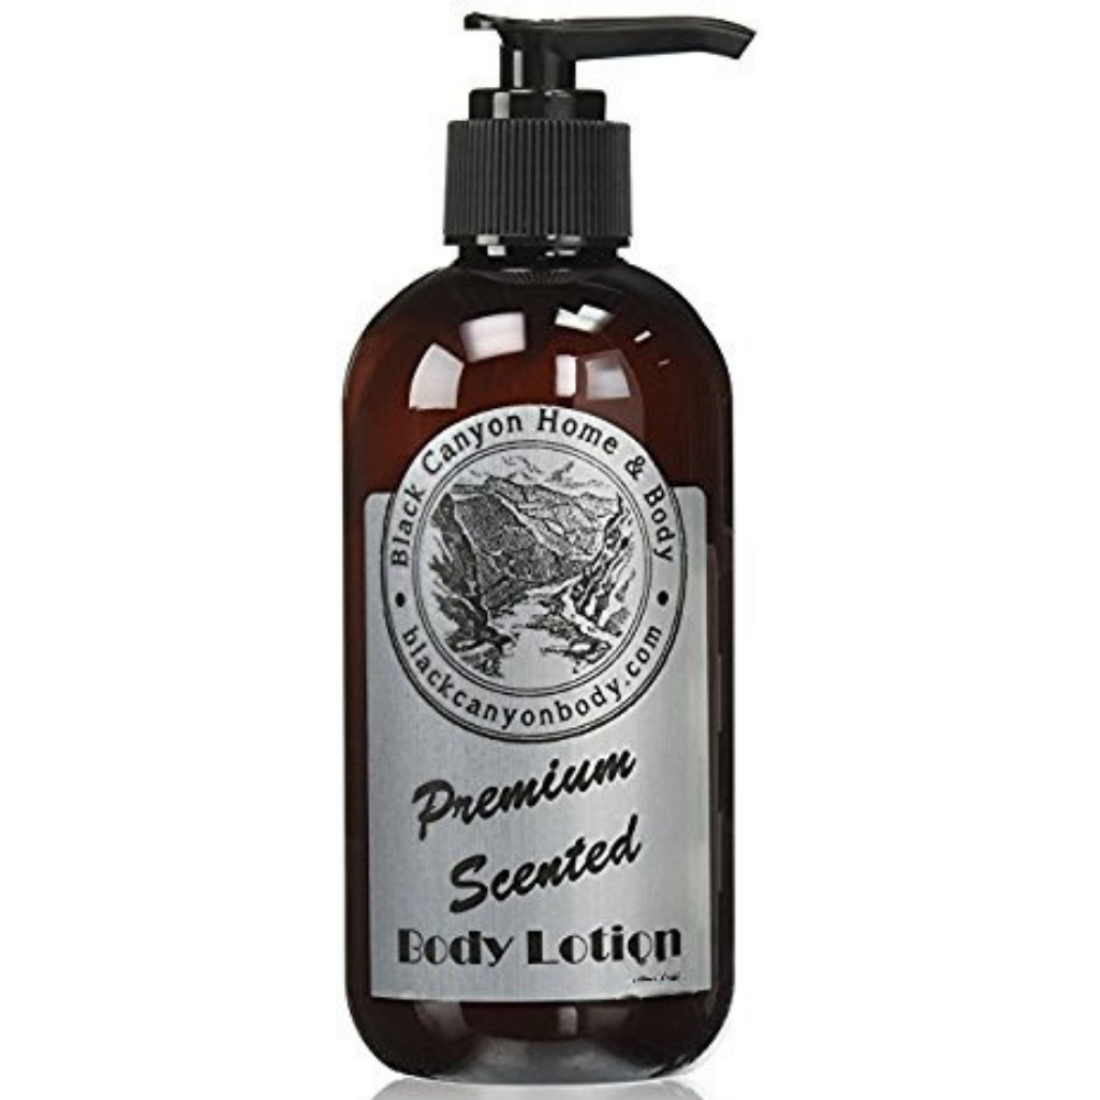 Black Canyon Apple Pecan Fritter Scented Luxury Body Lotion with Lanolin and Jojoba Oil